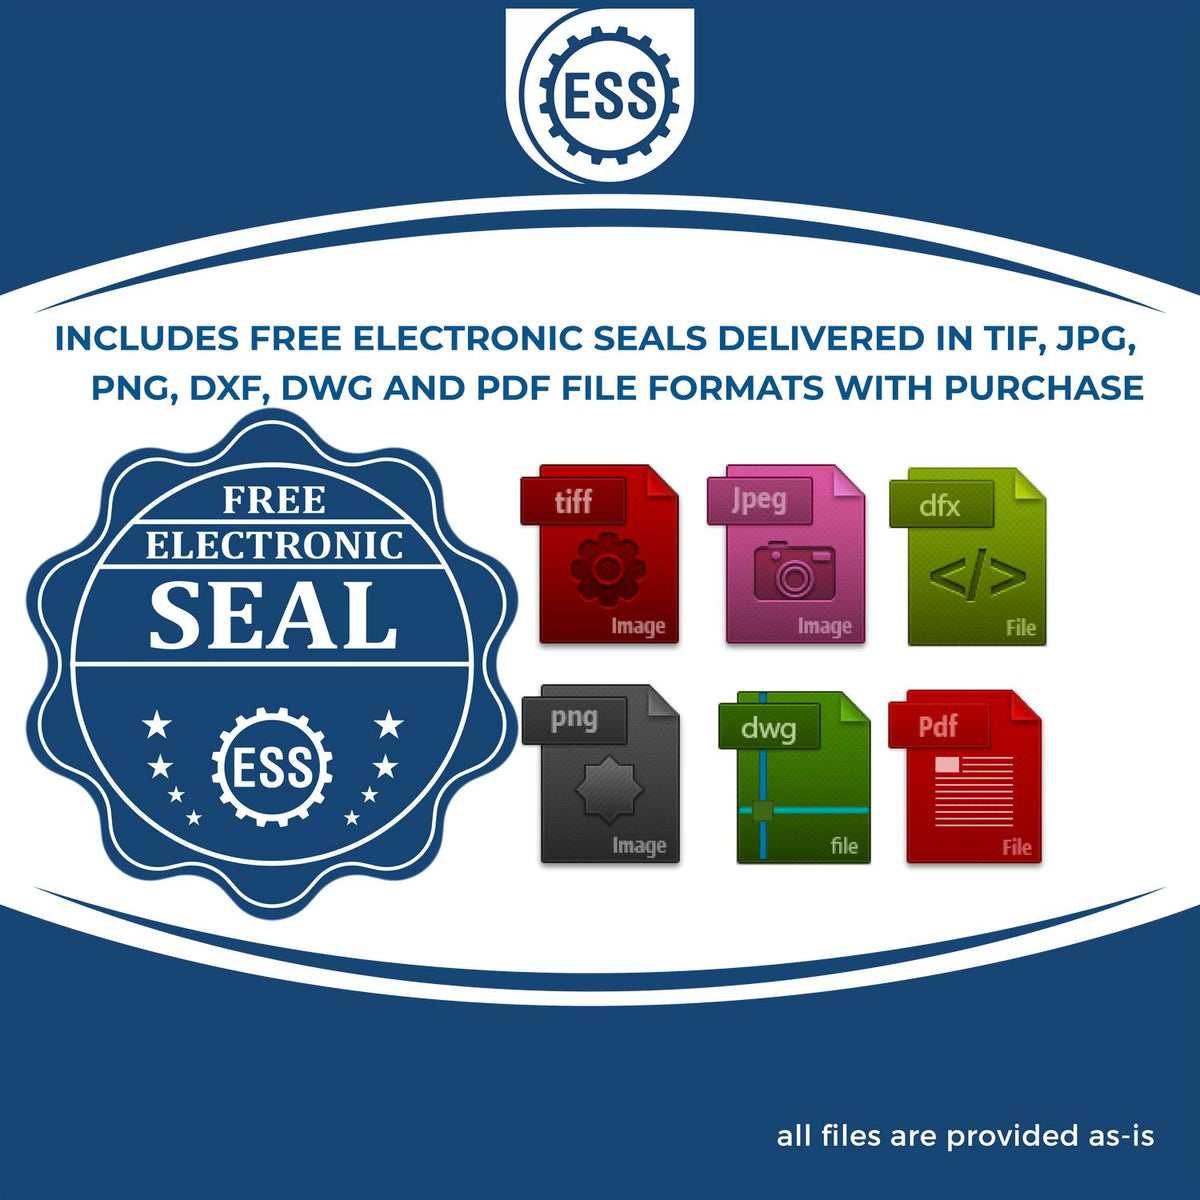 An infographic for the free electronic seal for the Slim Pre-Inked North Carolina Land Surveyor Seal Stamp illustrating the different file type icons such as DXF, DWG, TIF, JPG and PNG.